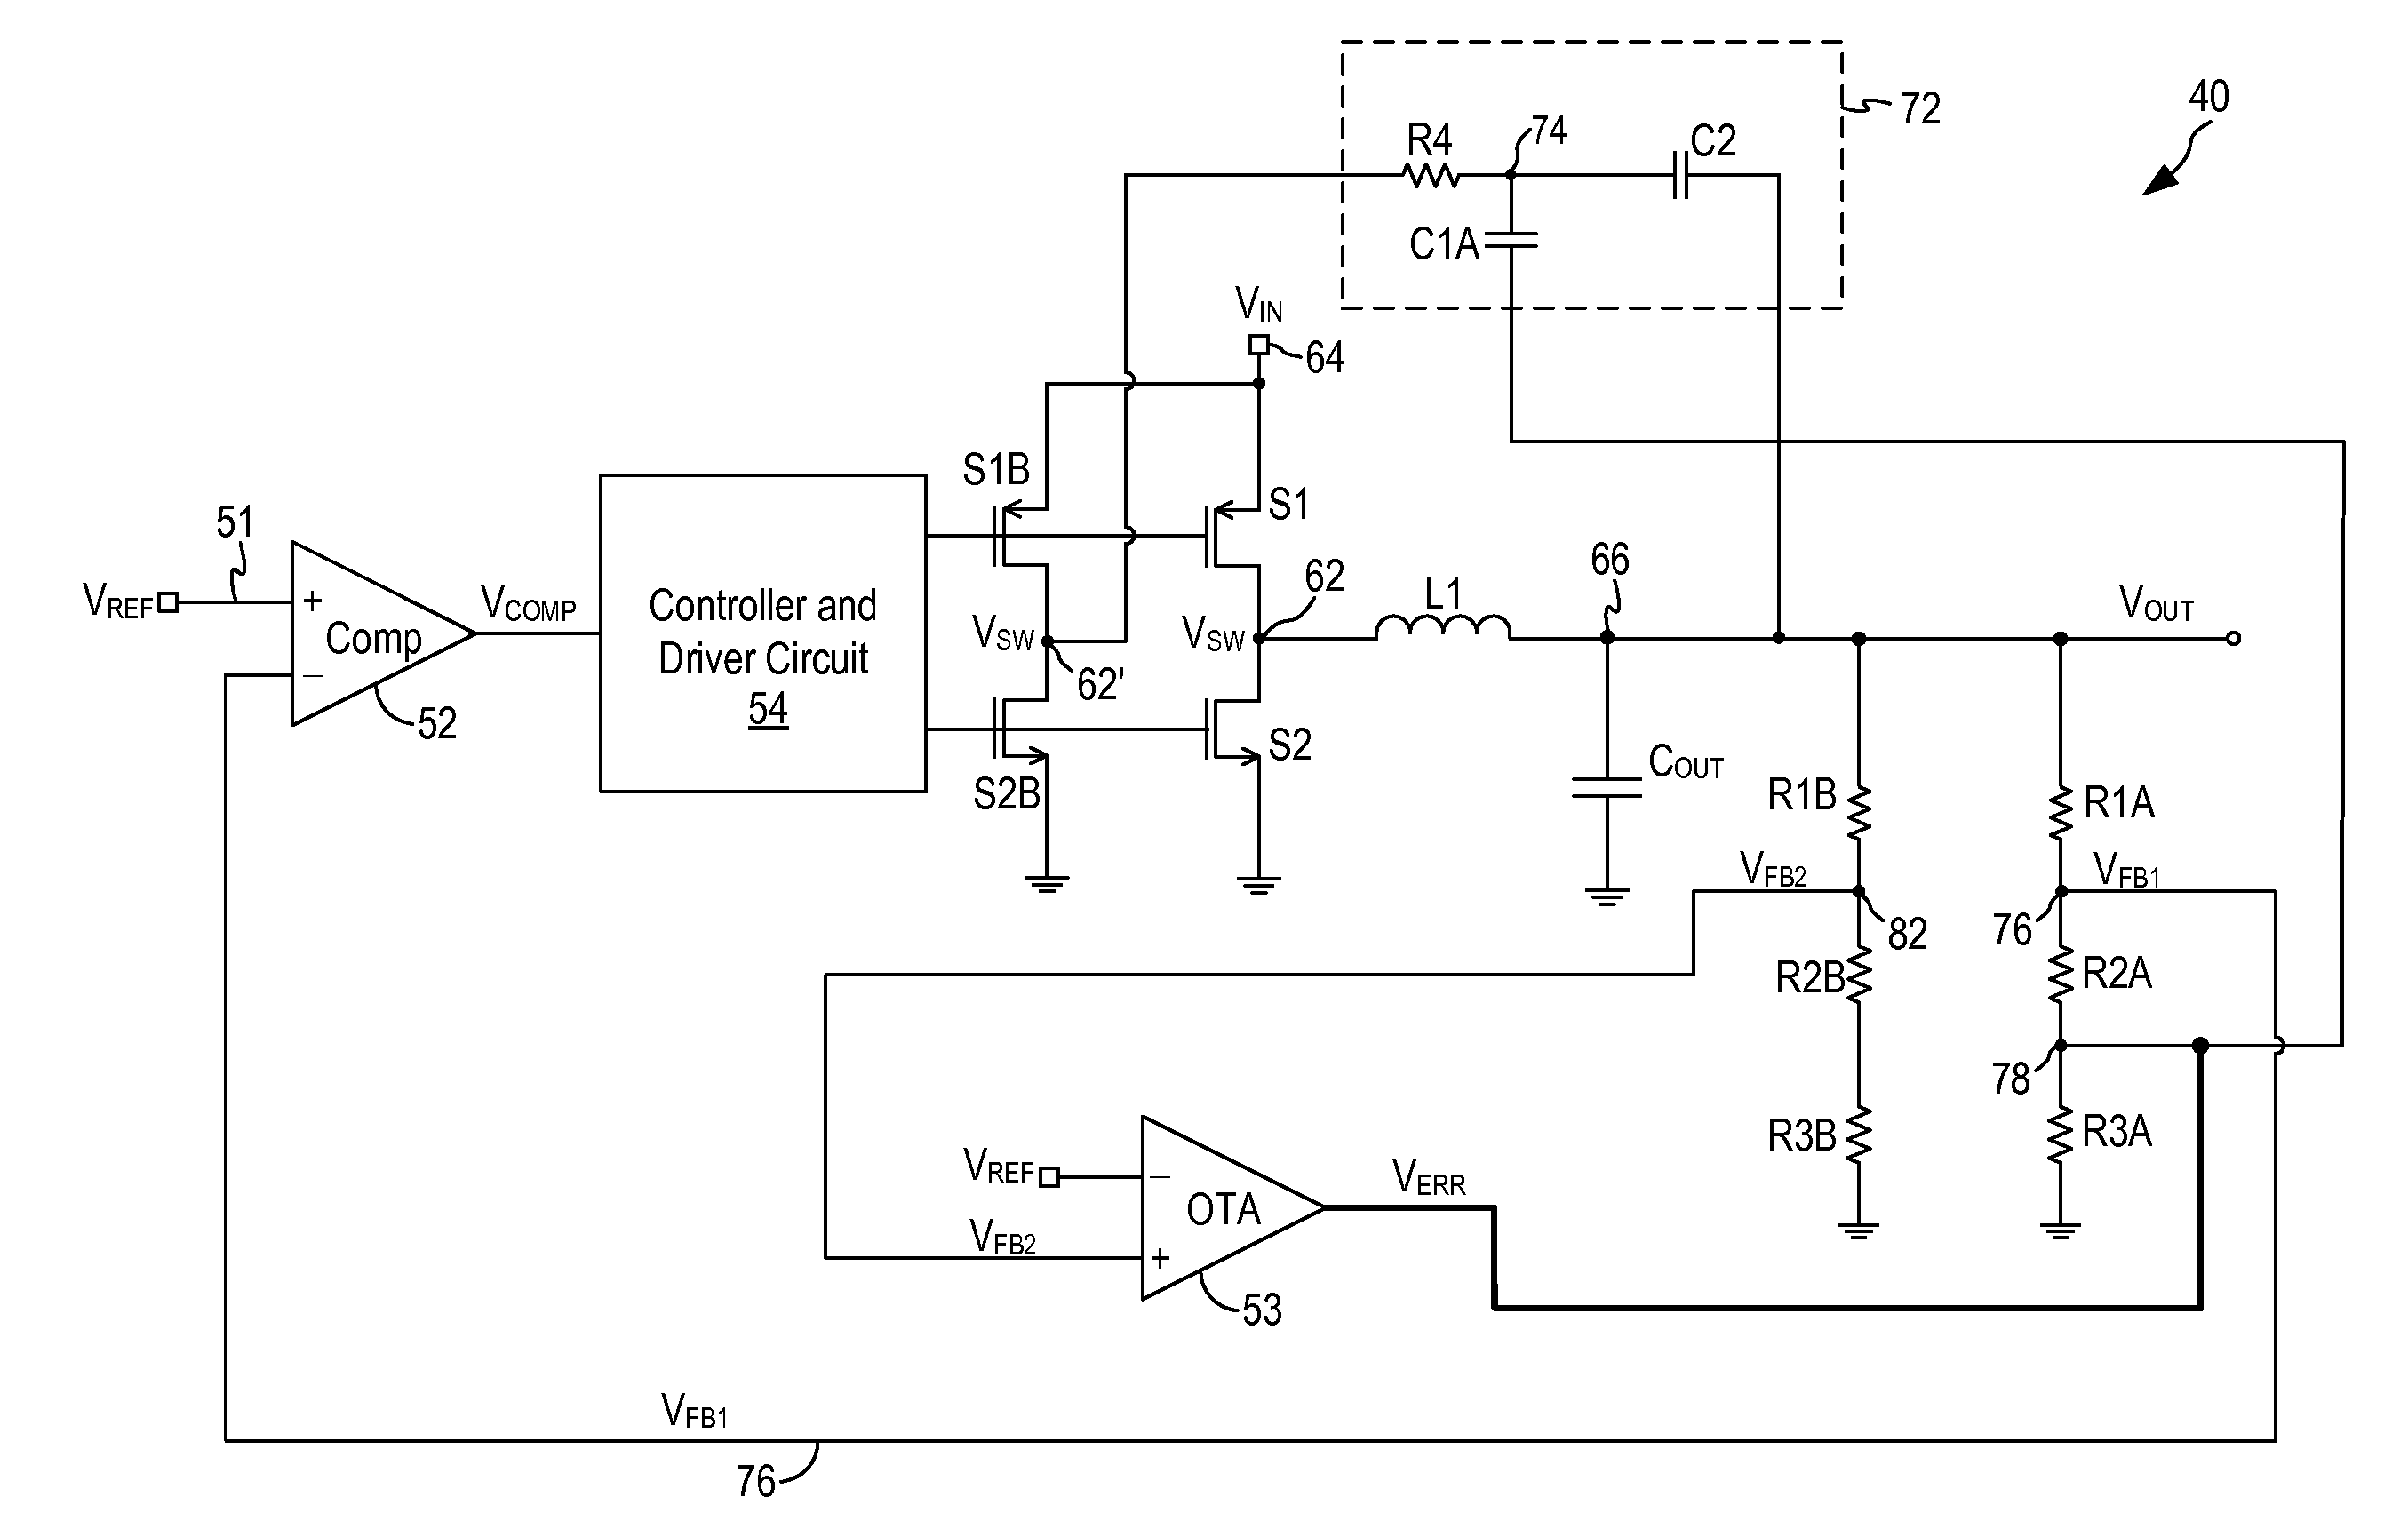 Buck dc-dc converter with improved accuracy